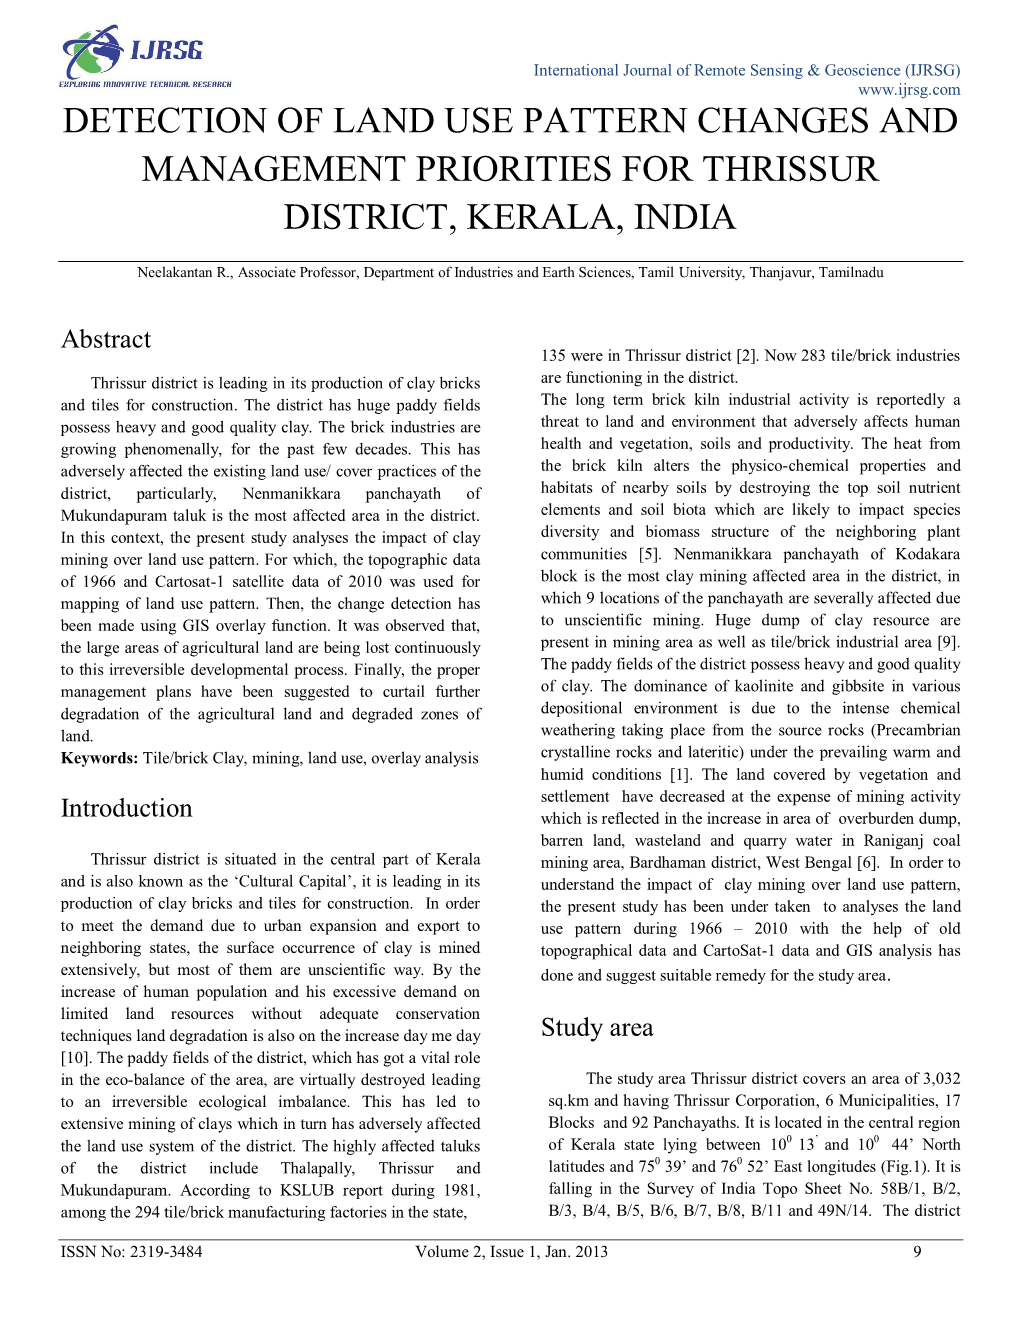 Detection of Land Use Pattern Changes and Management Priorities for Thrissur District, Kerala, India